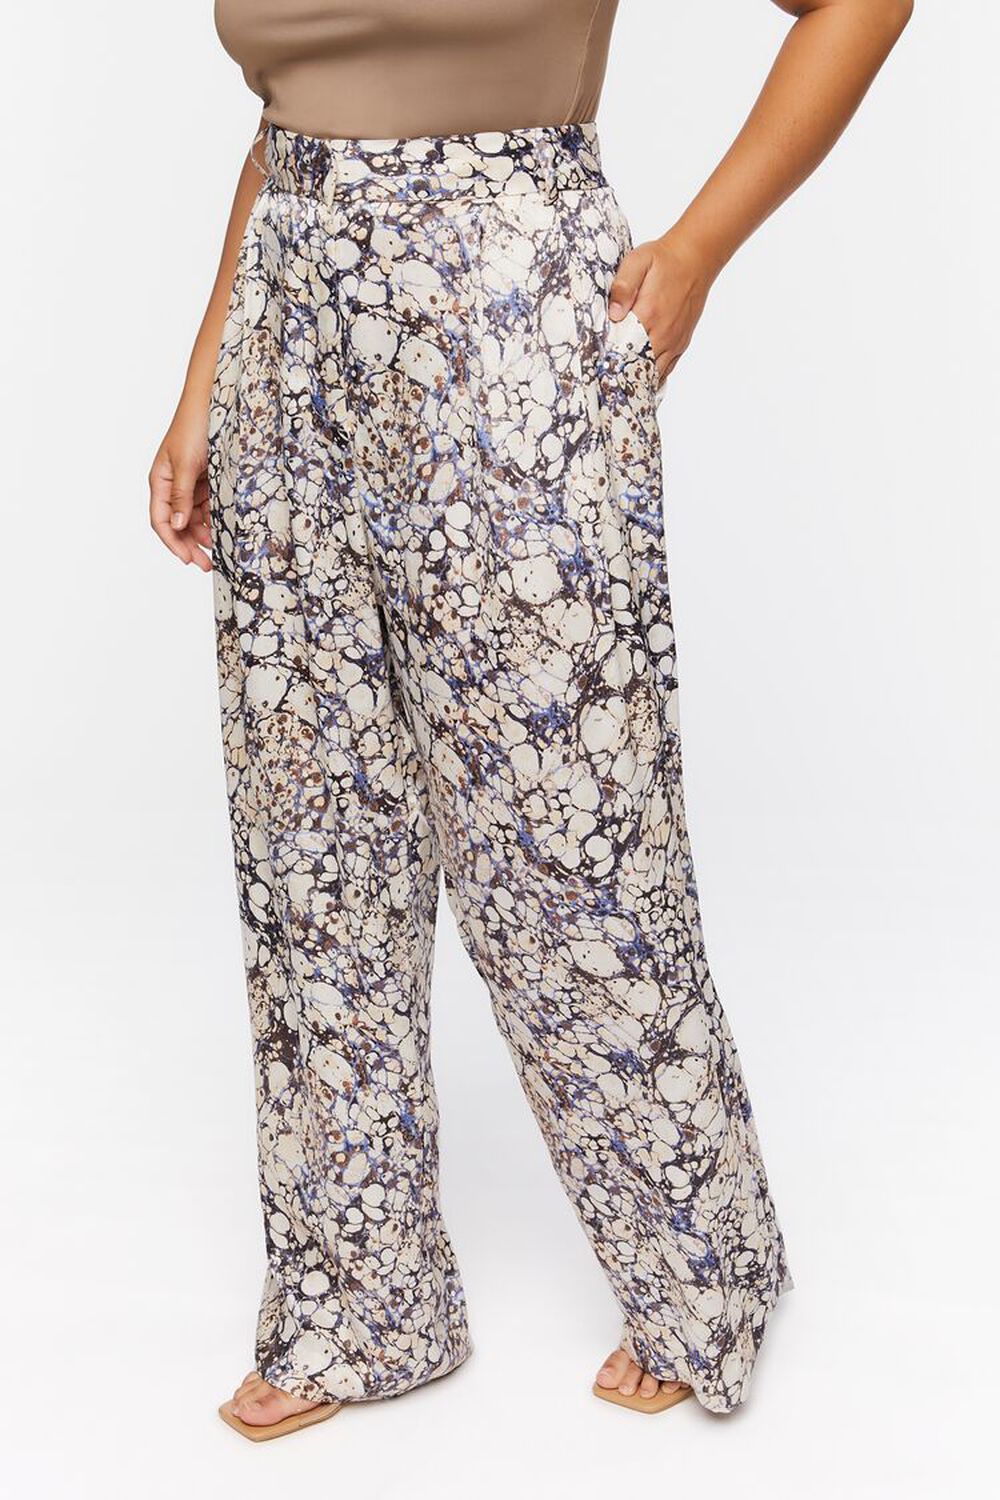 TAN/MULTI Plus Size Abstract Marble Print Pants, image 3